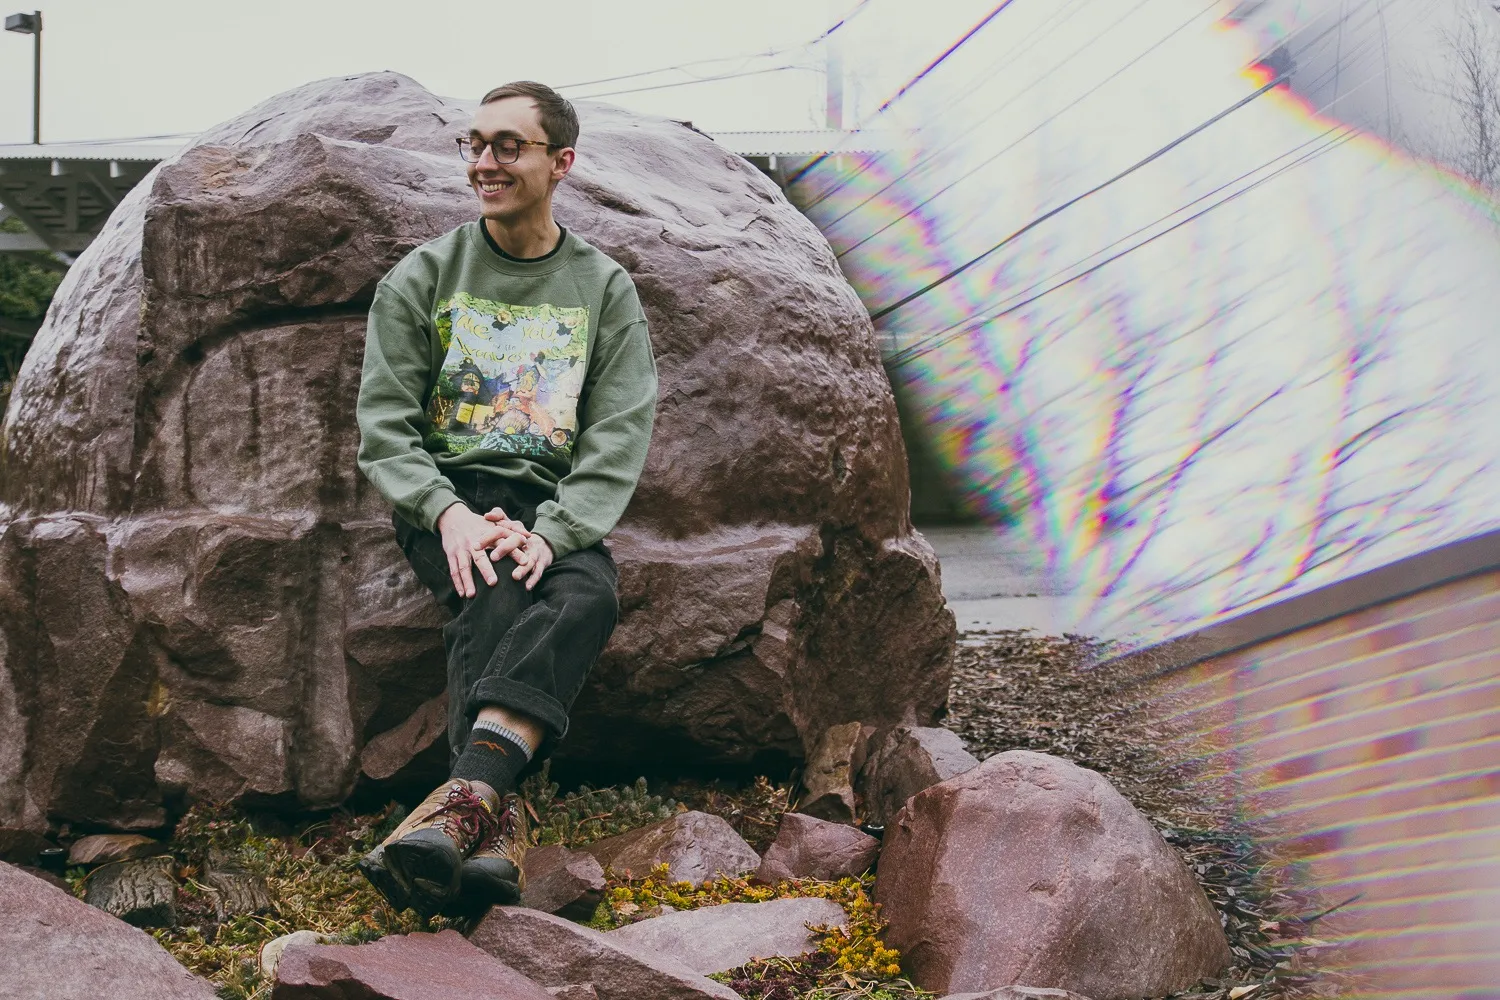 Scott Lippitt sits in front of rocks and smiles.